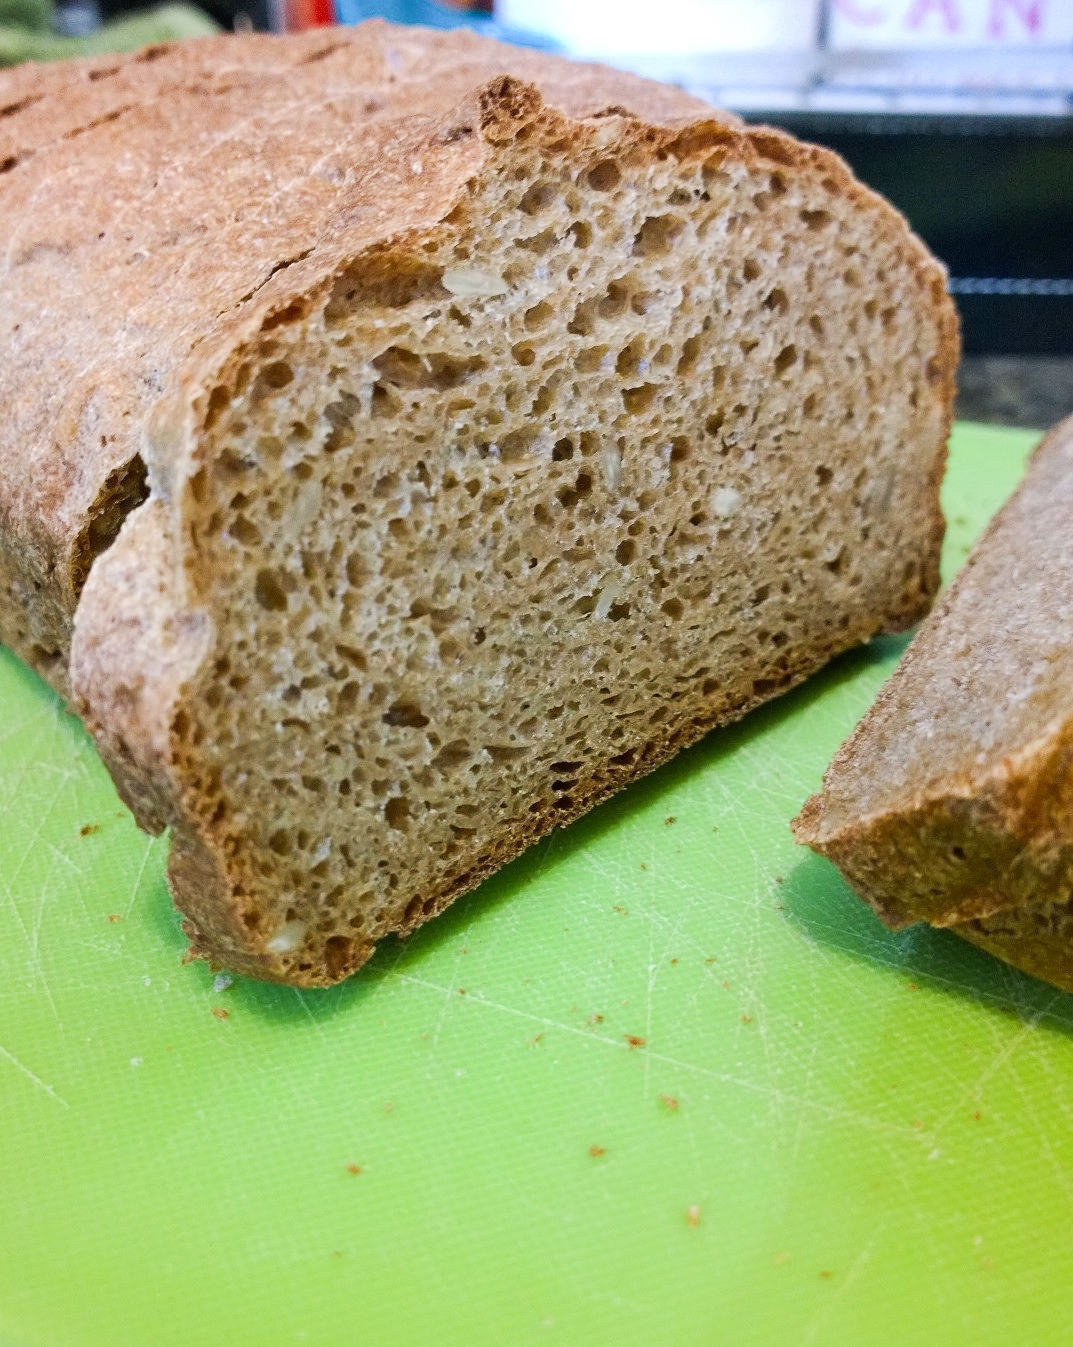 100% Whole Wheat Bread for people who suck at making bread